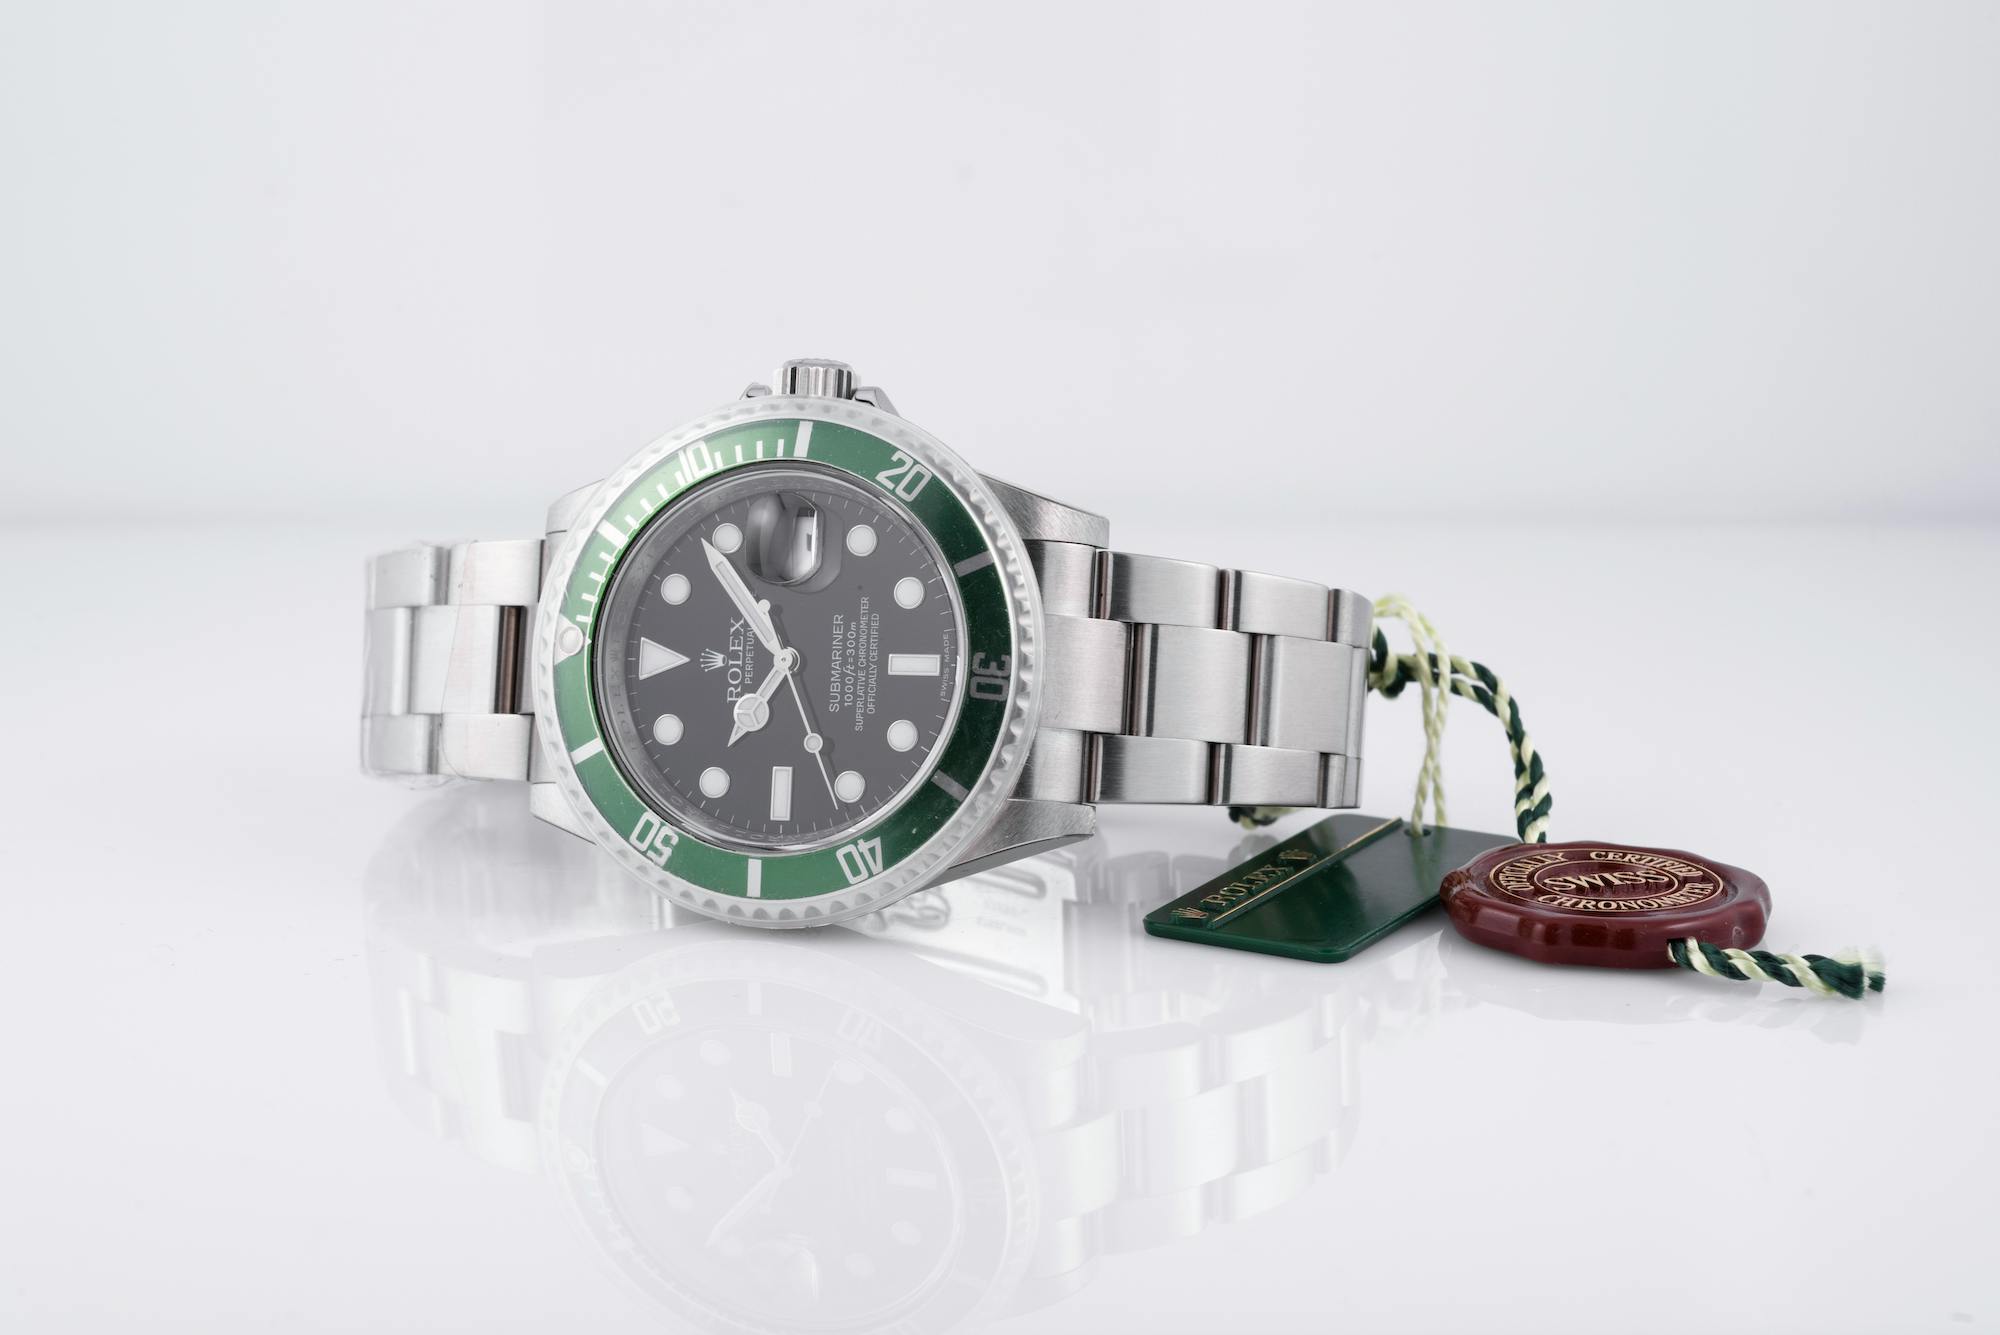 Rolex Submariner Date Kermit Random Serial 2010 for $19,832 for sale from a  Private Seller on Chrono24